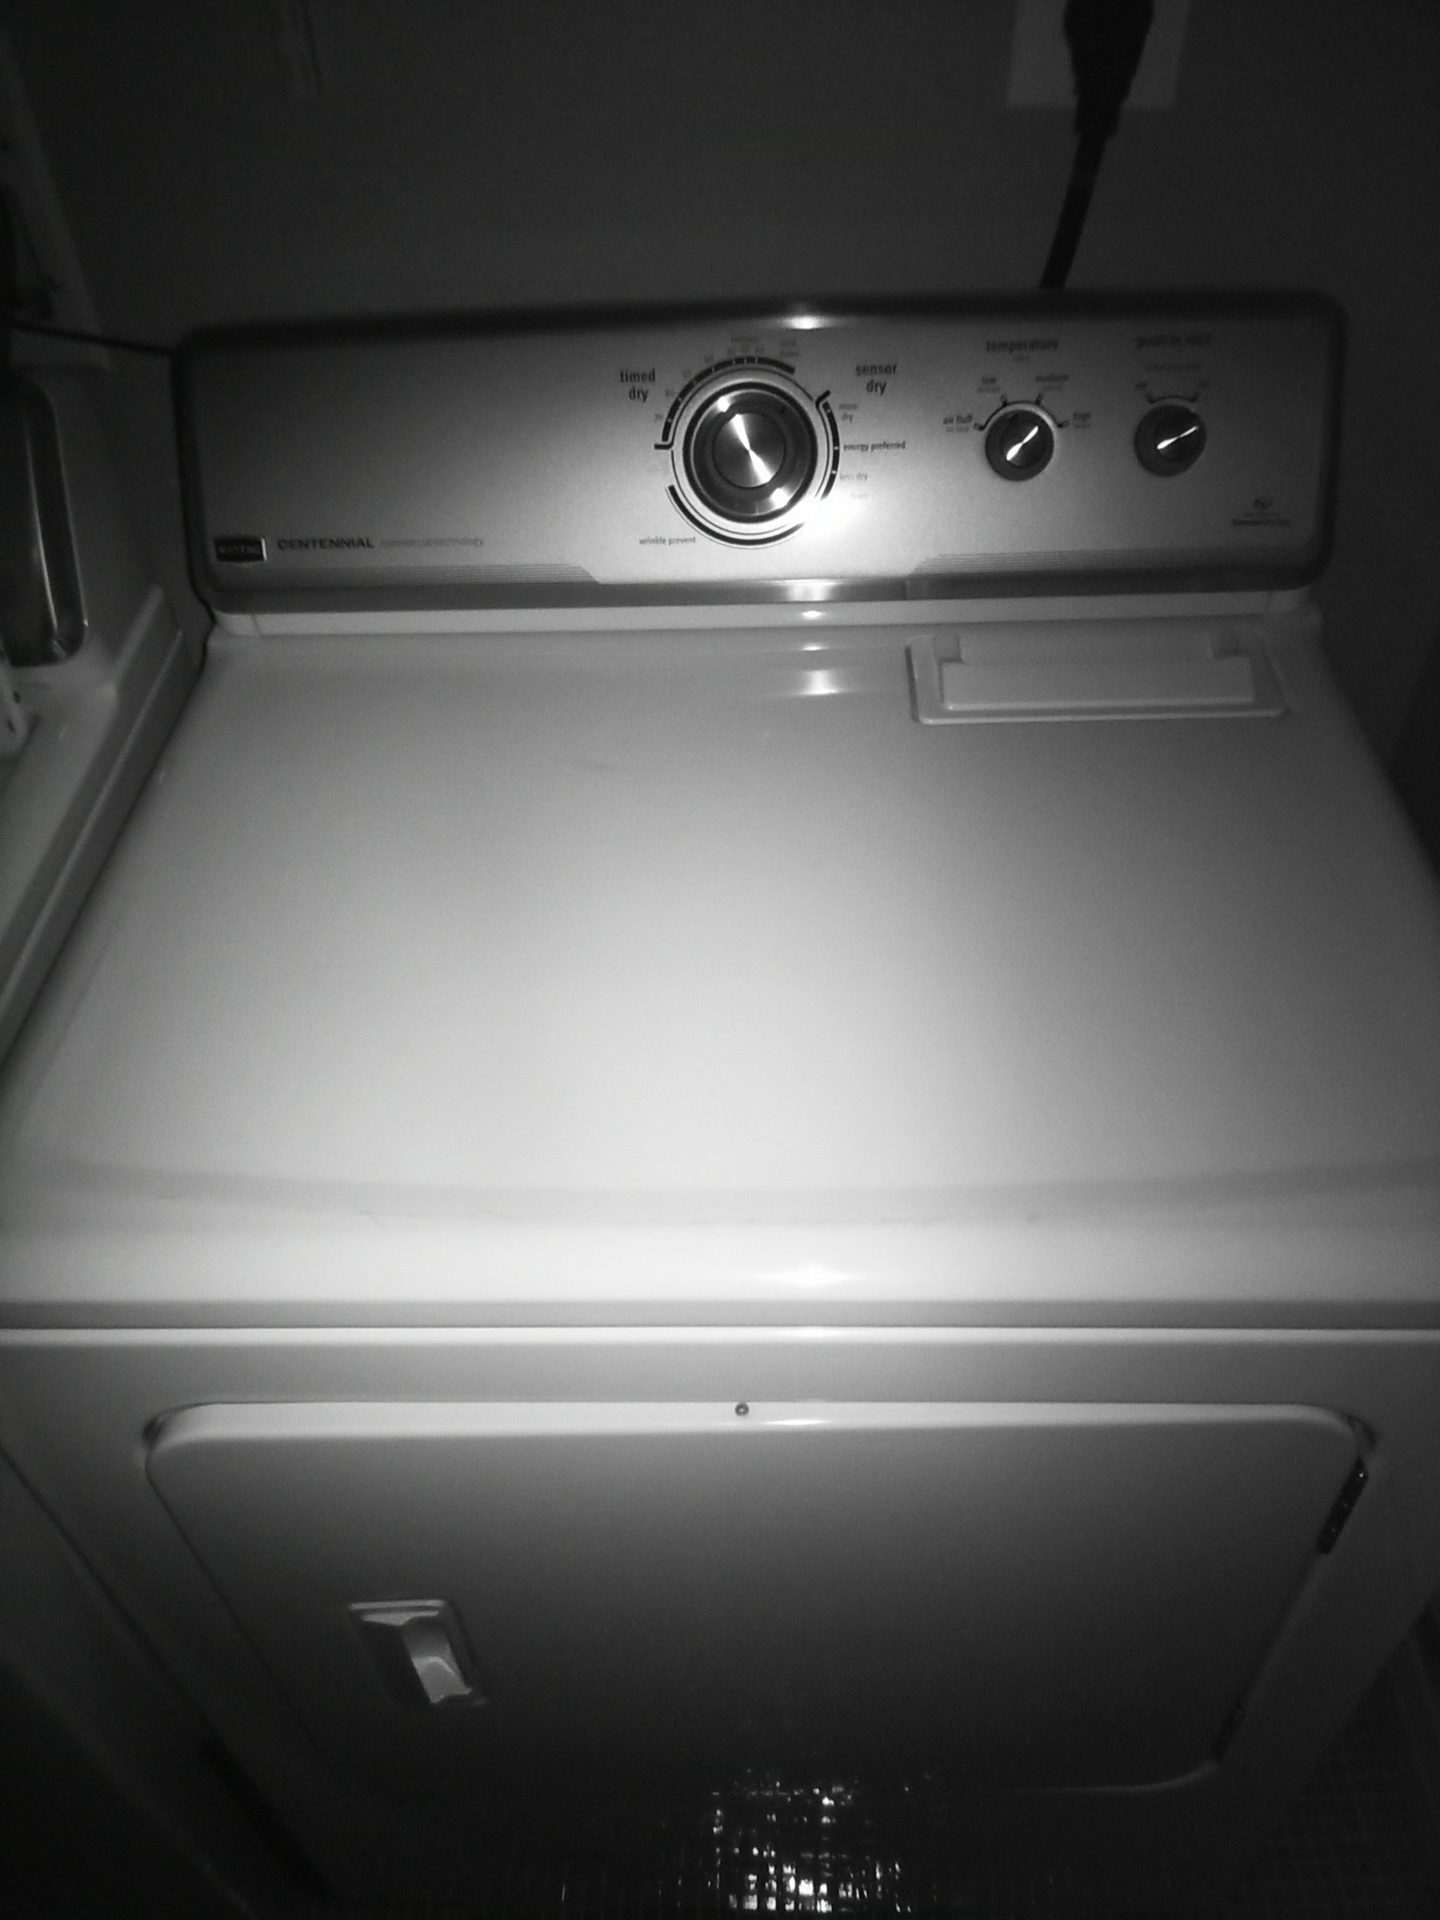 DOOGEE S96 Pro Night Vision Camera Sample showing a washer.